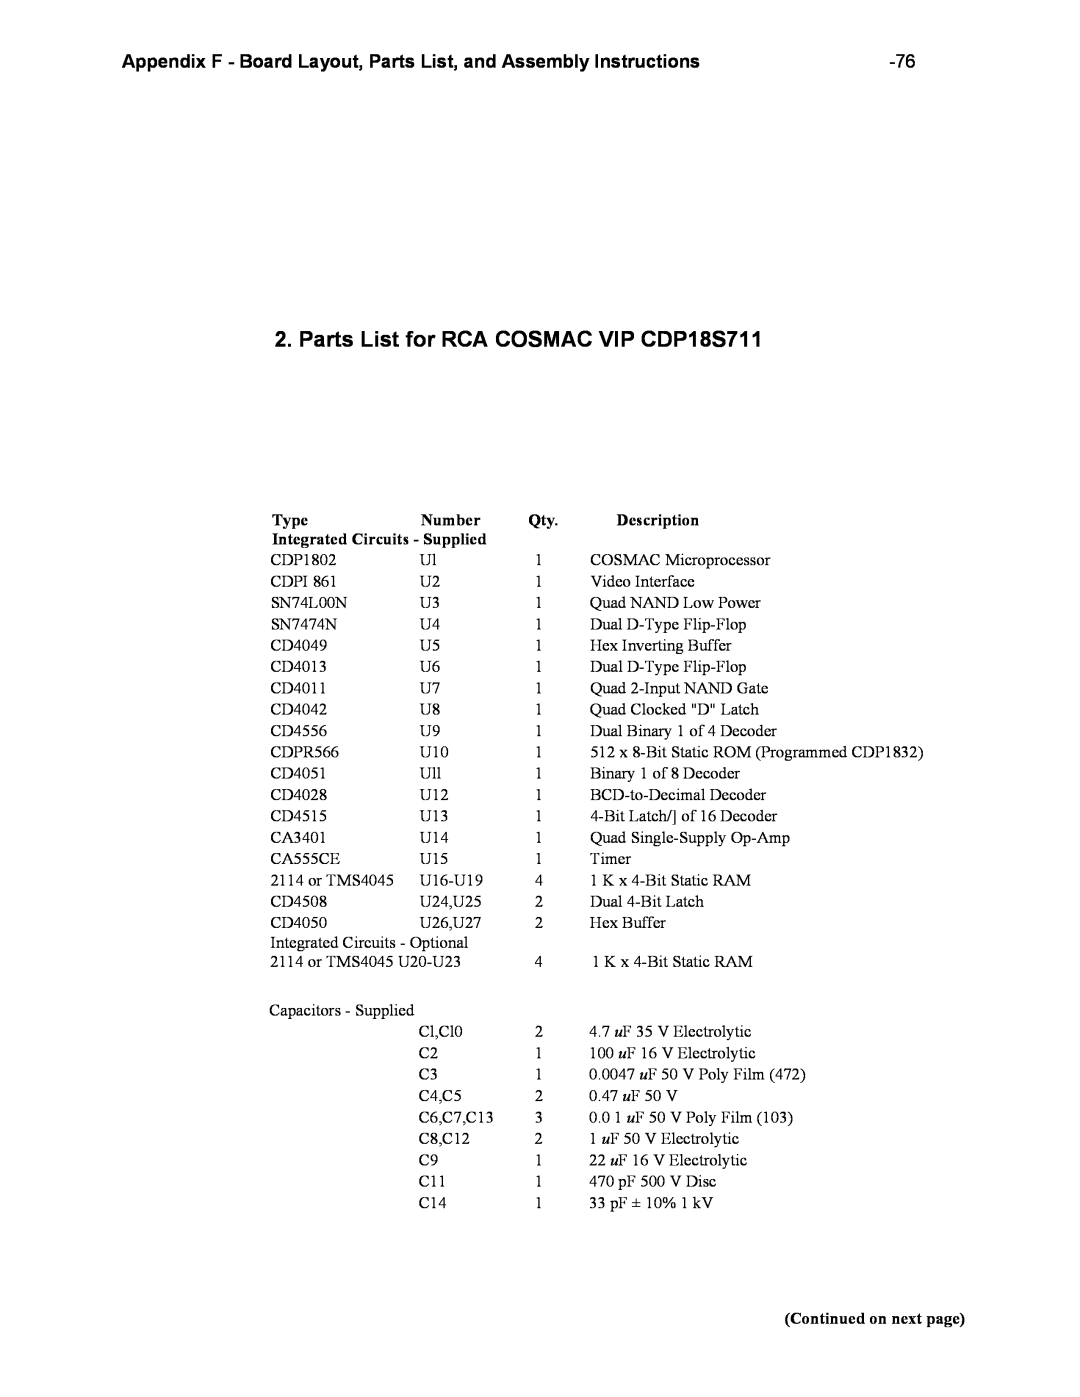 RCA manual Parts List for RCA COSMAC VIP CDP18S711 